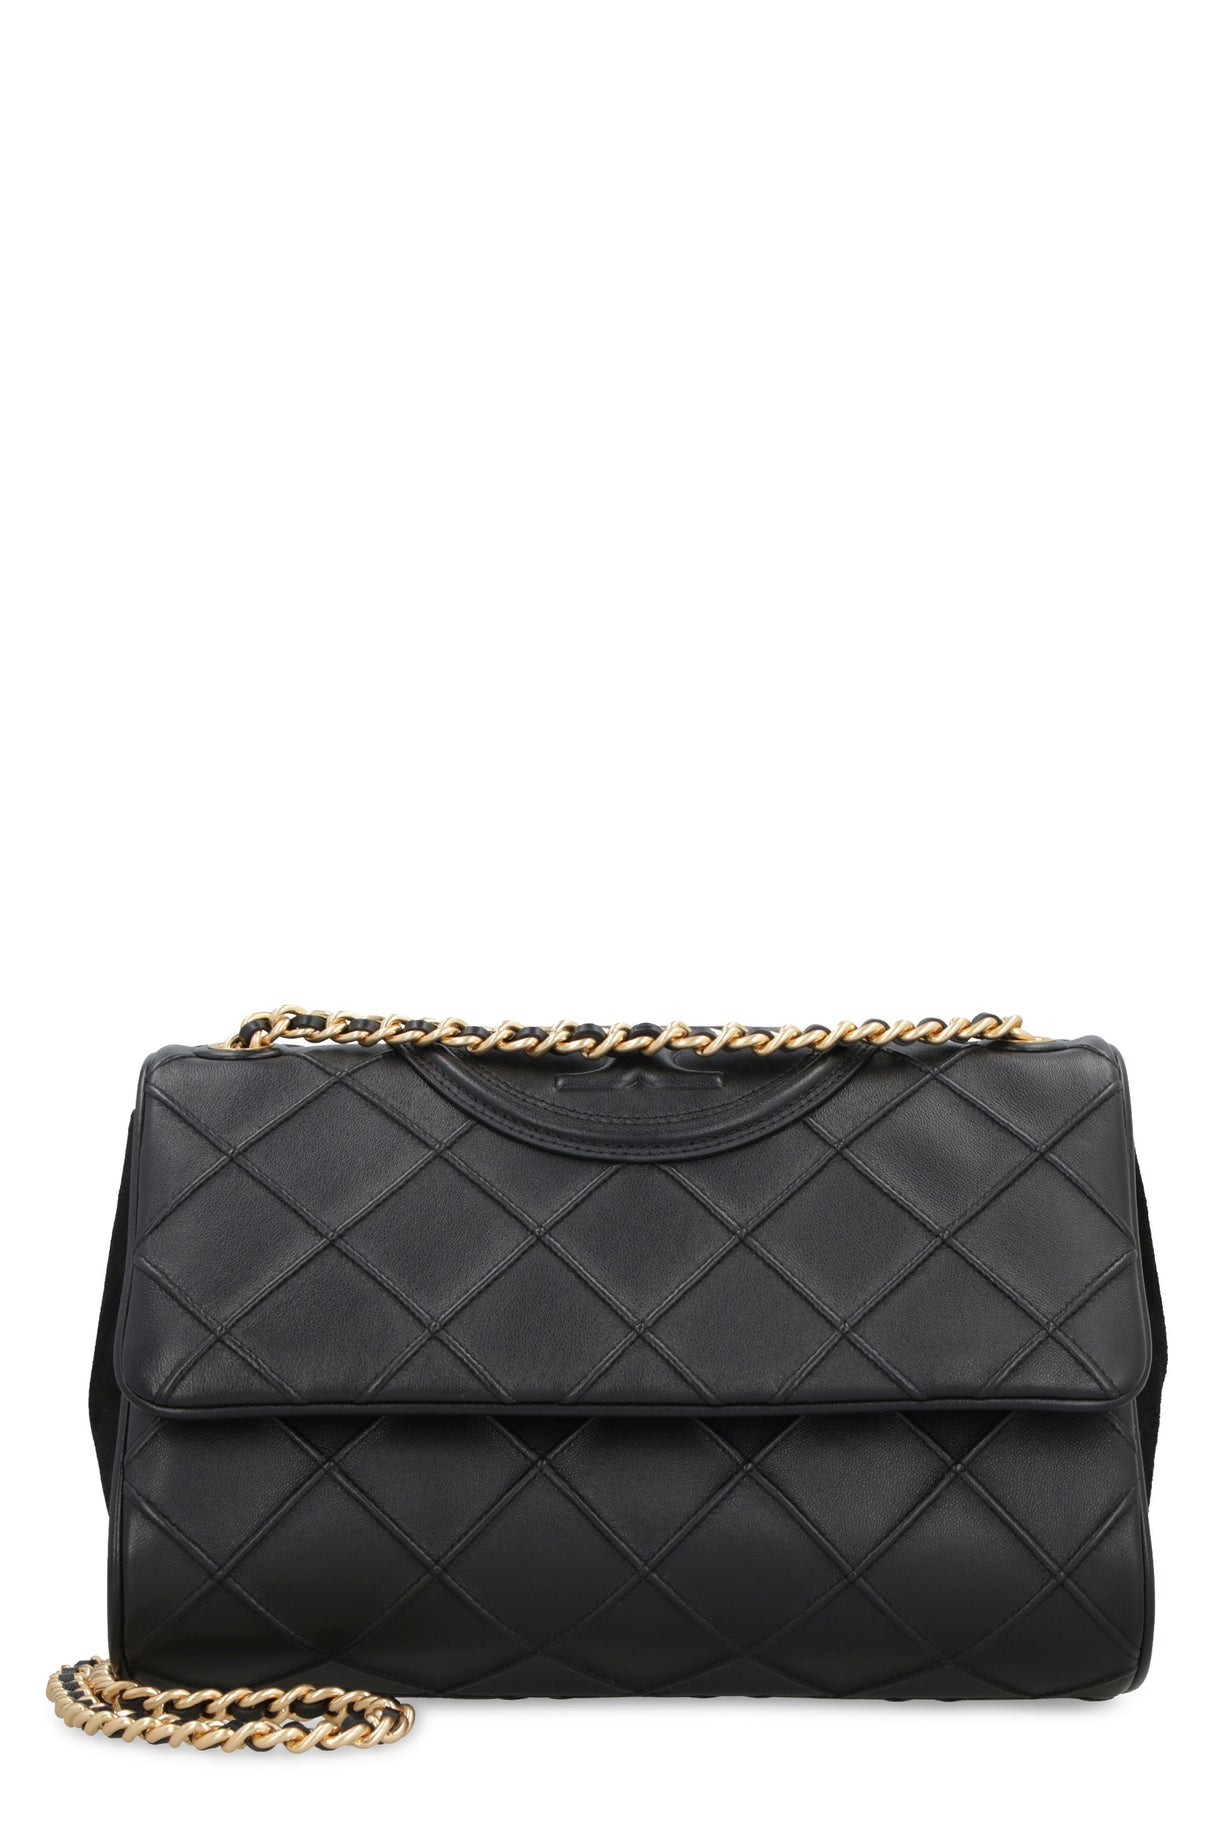 TORY BURCH Soft Black Quilted Leather Shoulder Bag for Women